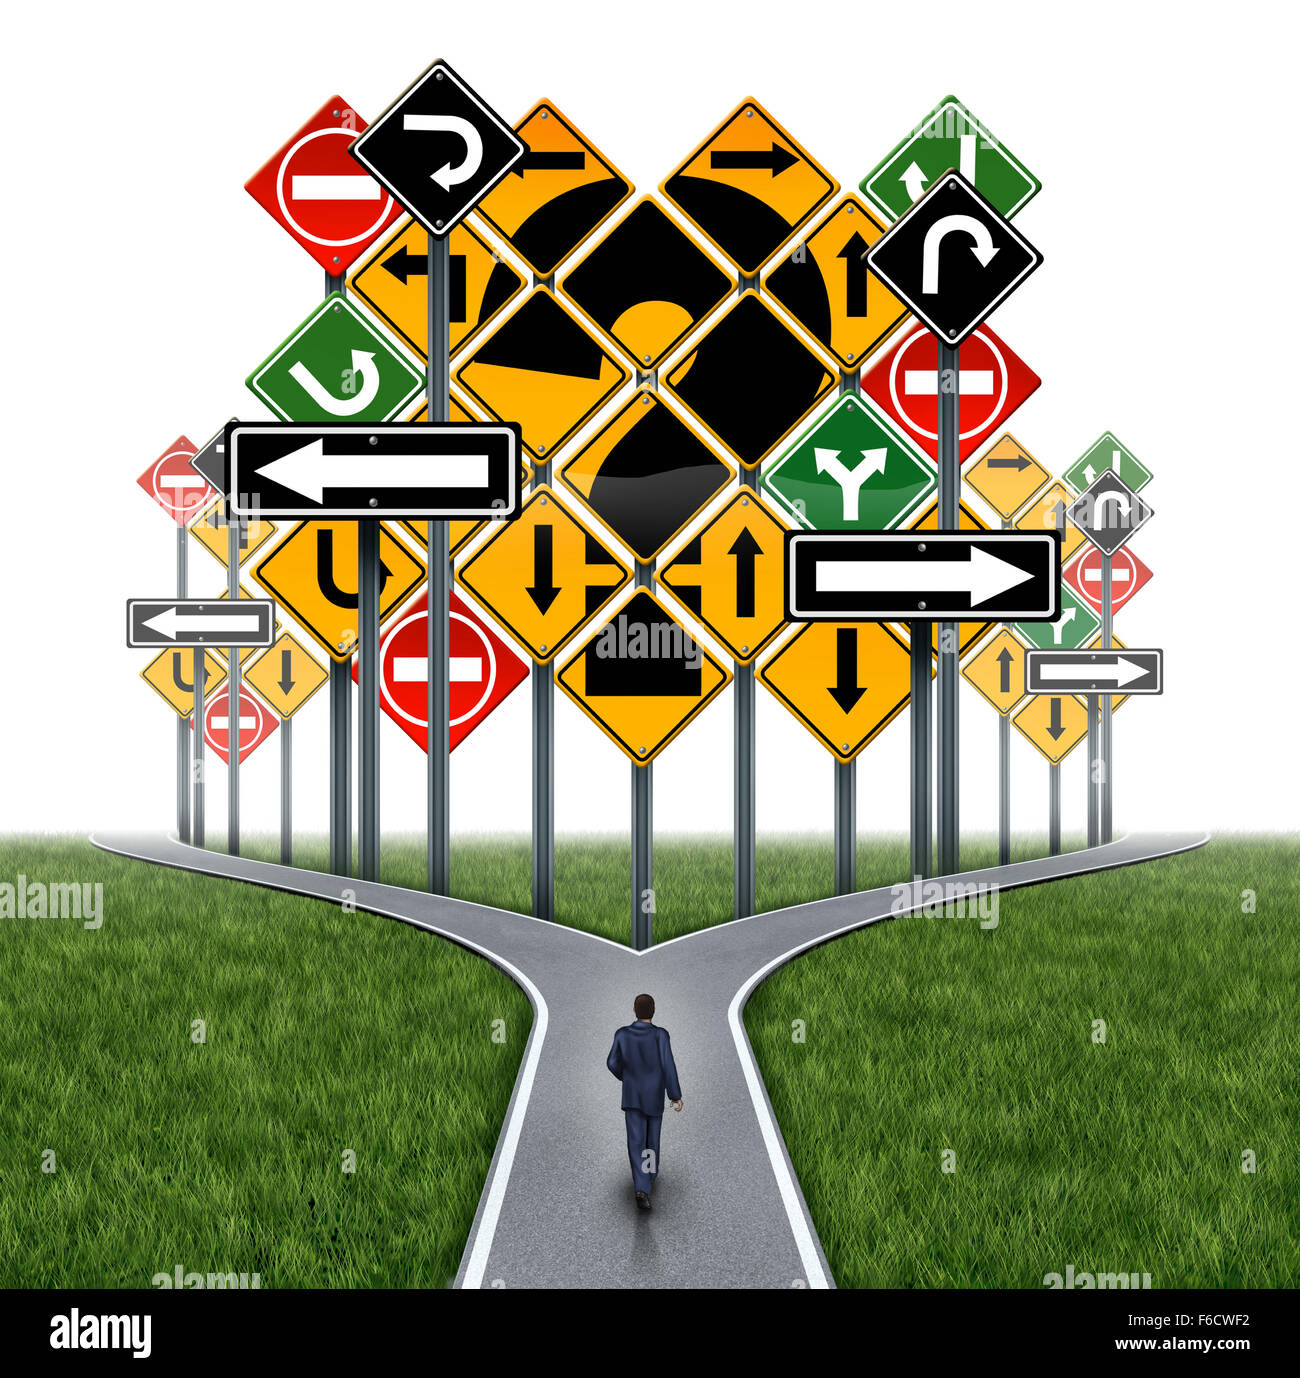 Business decision challenge concept as a businessman on a crossroad path facing an impass or dilemma with a group of traffic signs shaped as a question mark as a metaphor for consultation and corporate guidance. Stock Photo